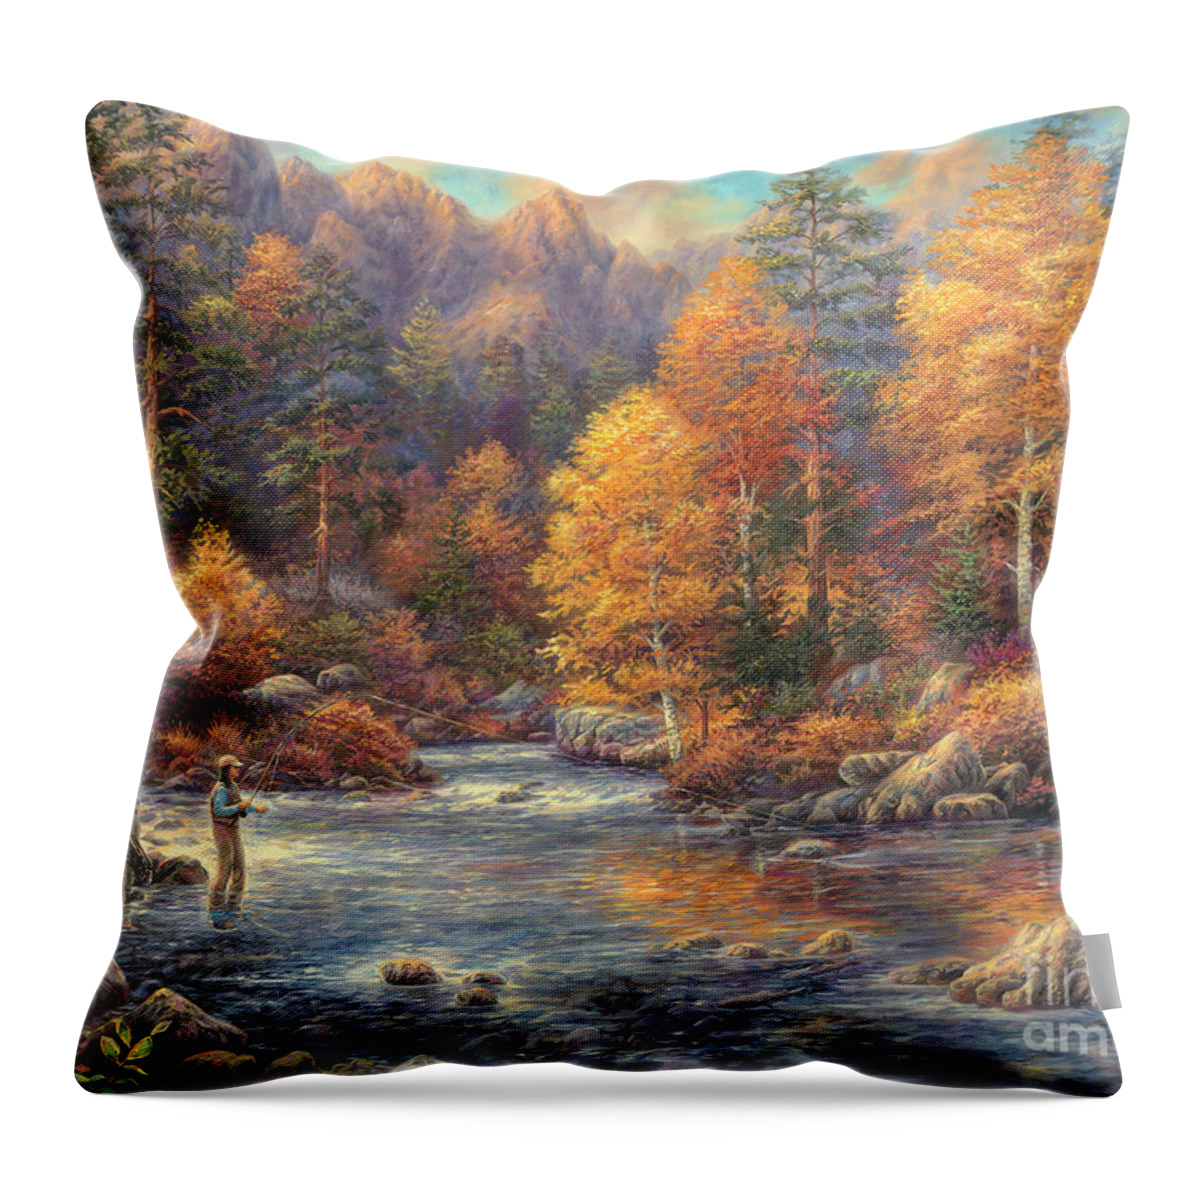 Fly Fishing Throw Pillow featuring the painting Fly Fishing Legacy by Chuck Pinson